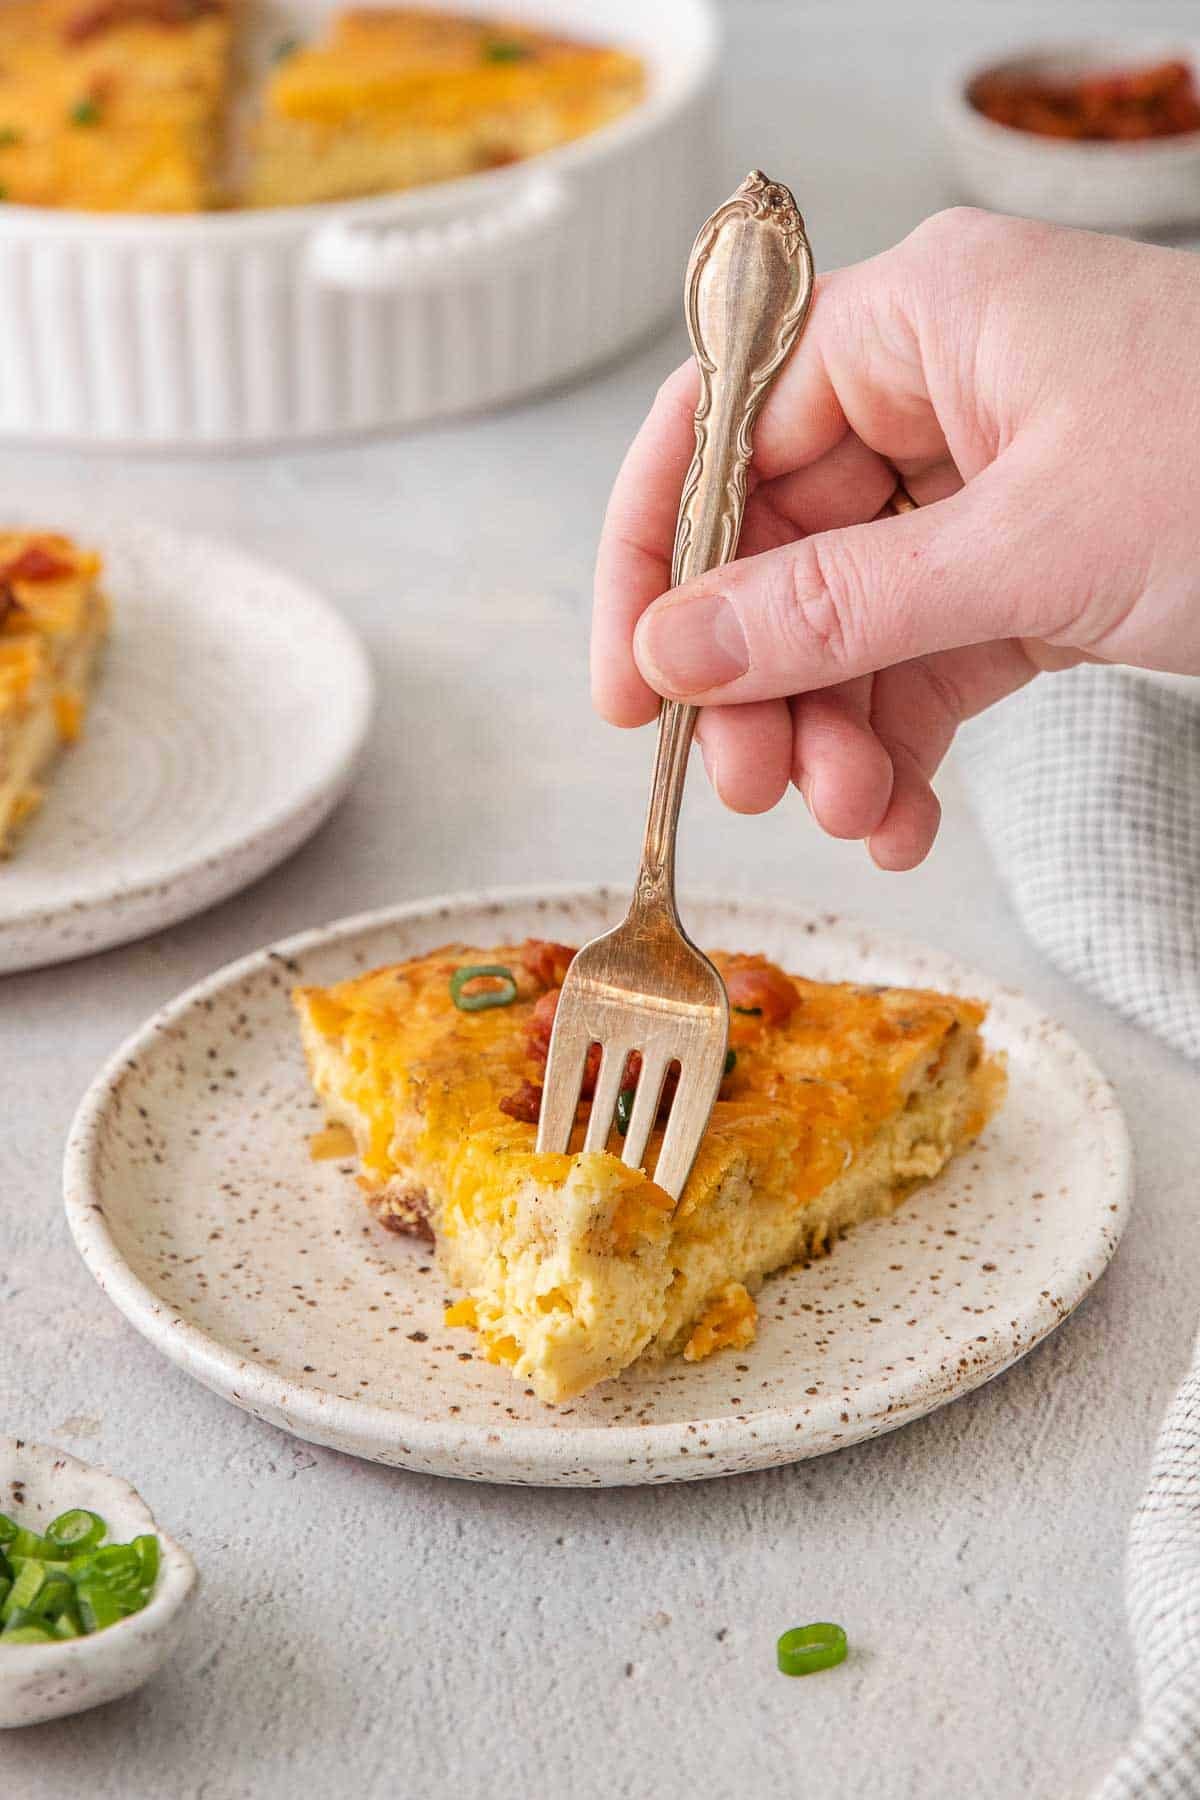 Slice of bisquick quiche on a white plate with a fork taking a bite.